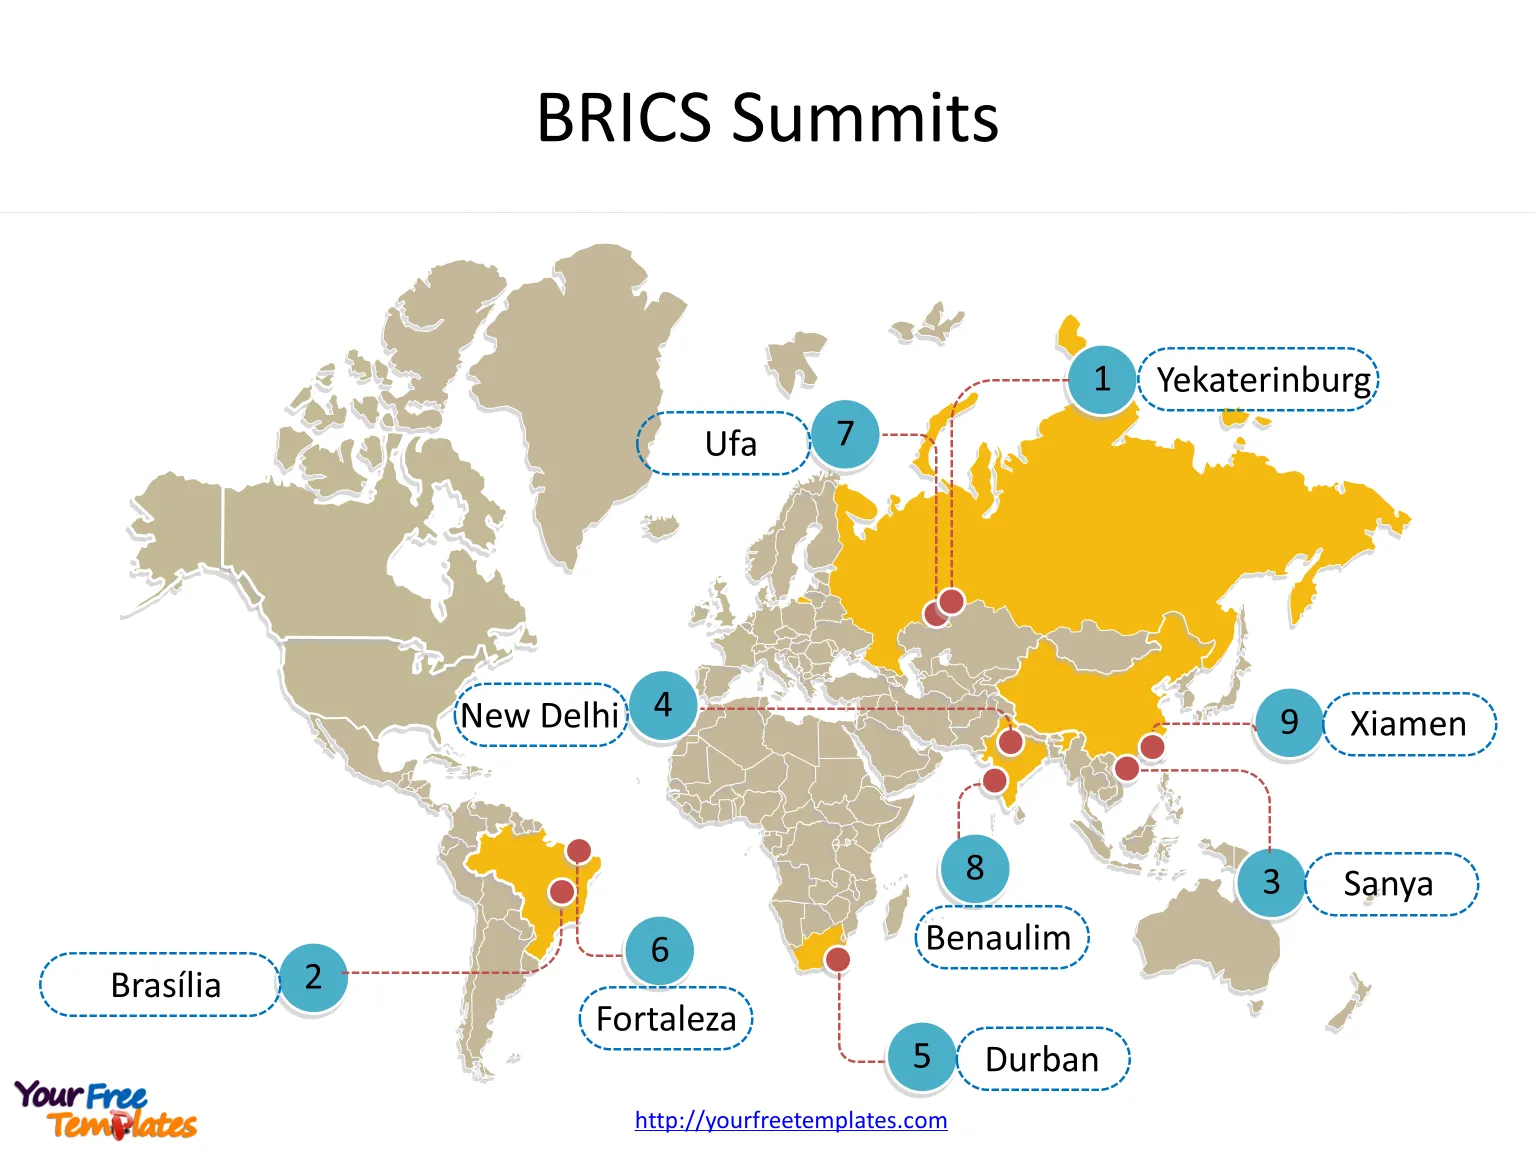 Create maps for BRICS with numbers for places